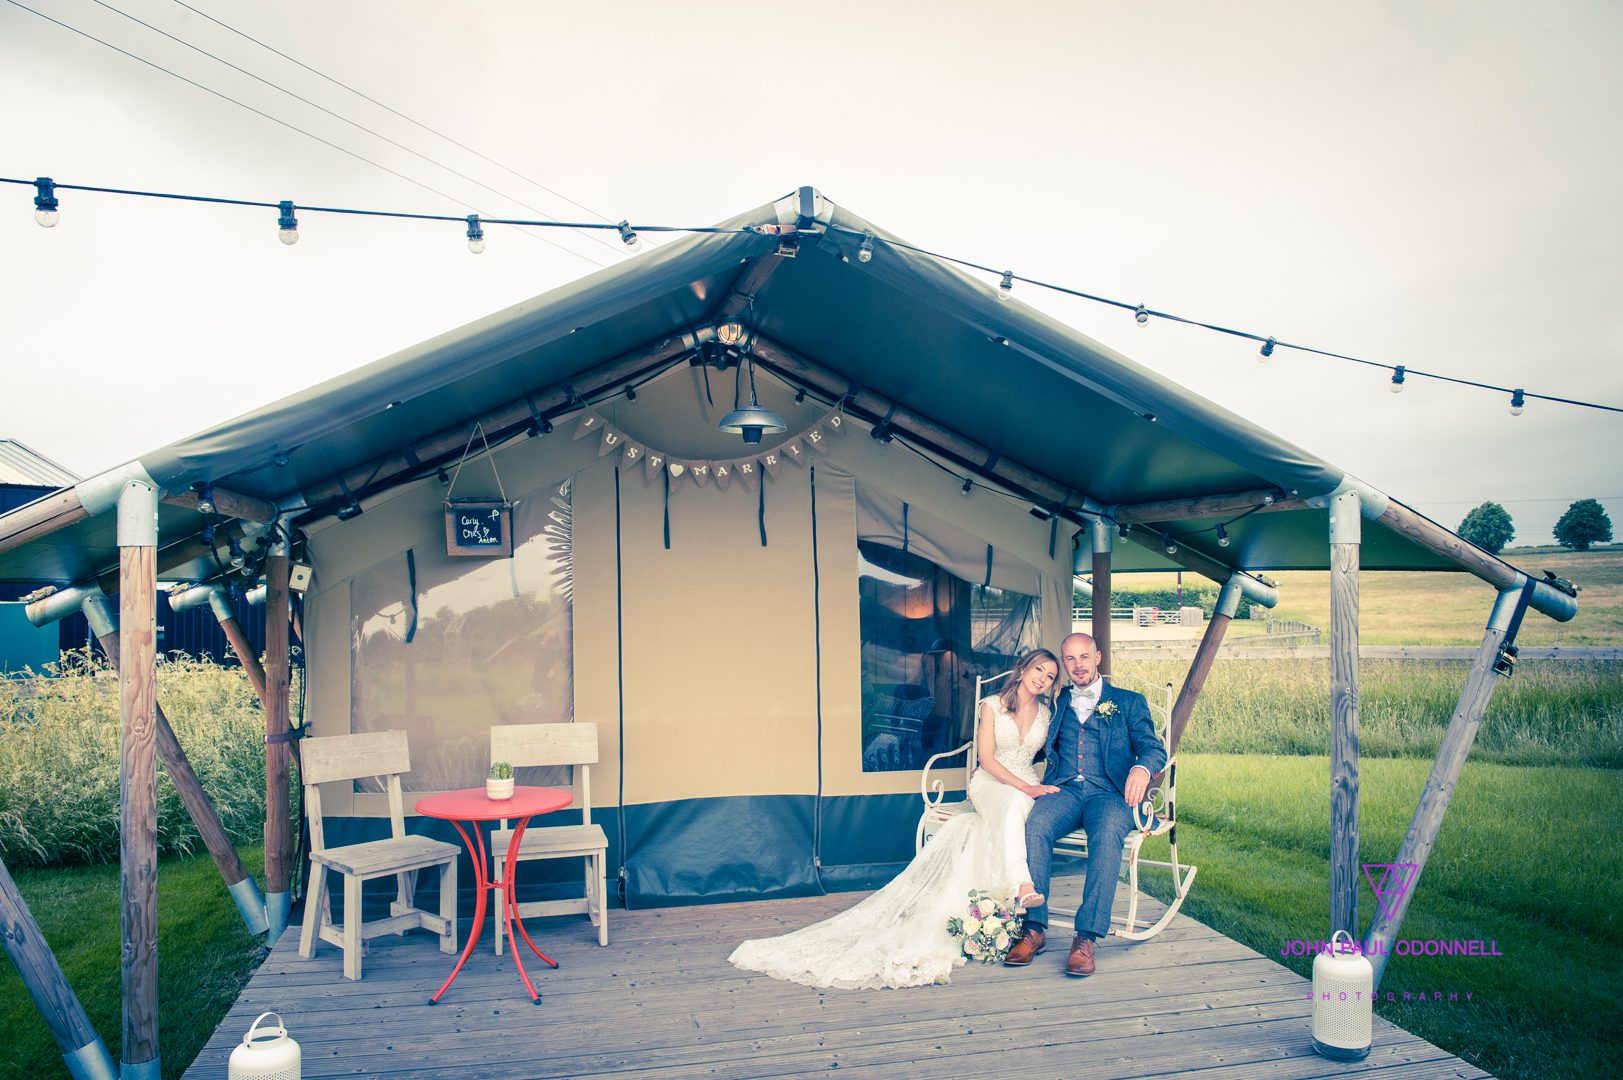 THE WEDDING OF CARLY AND CHRIS AT THE BARN AT ALSWICK